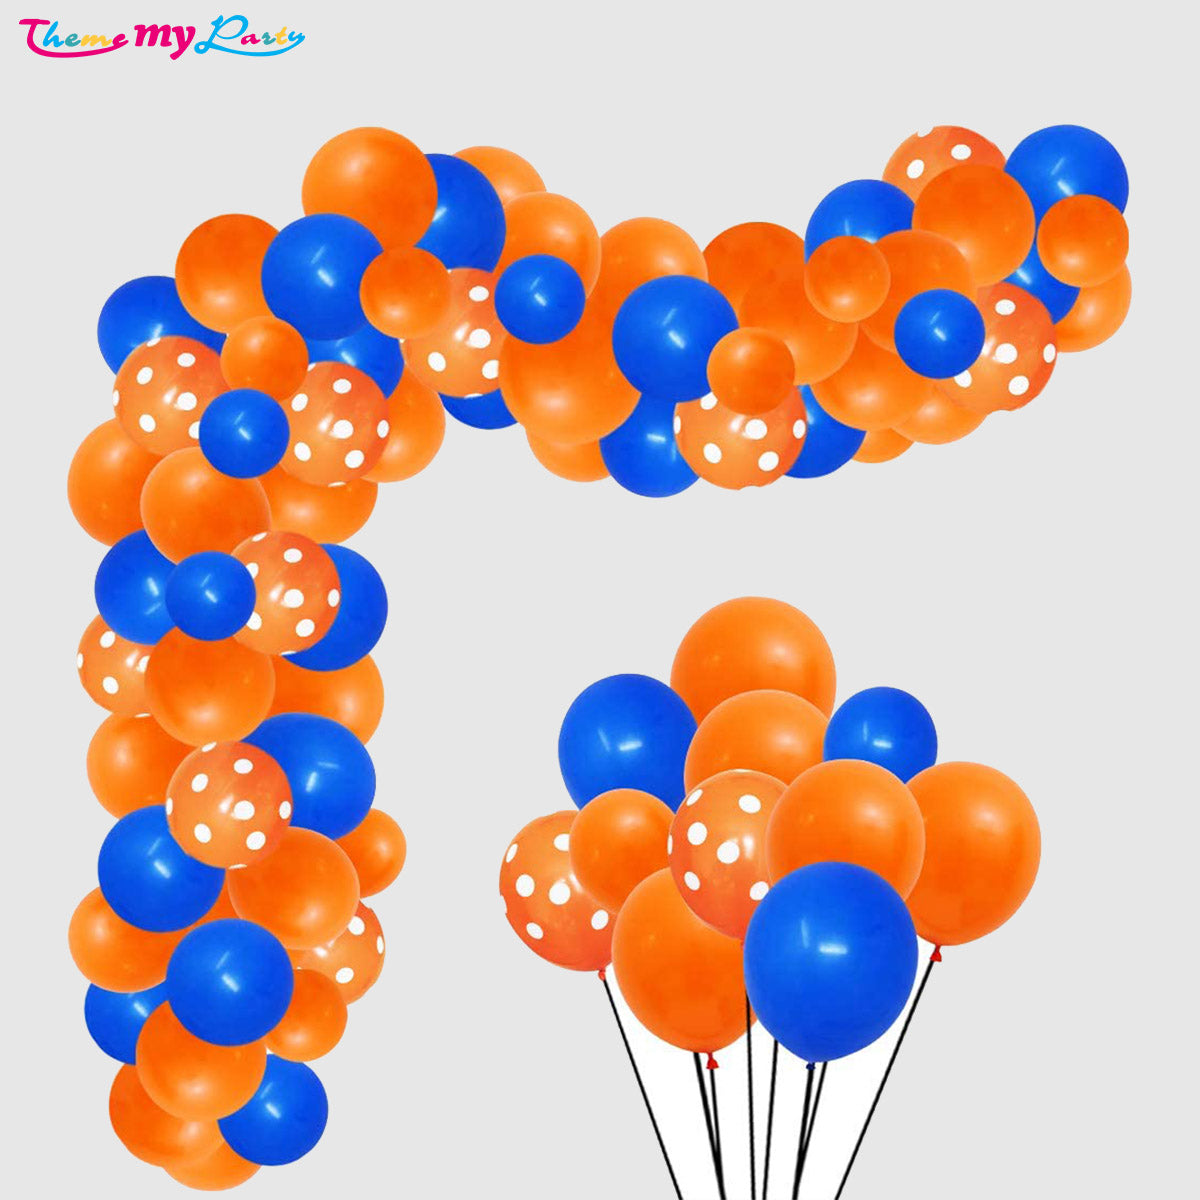 Space Party Balloon Arch Kit Blue And Orange Latex Balloons And Orange